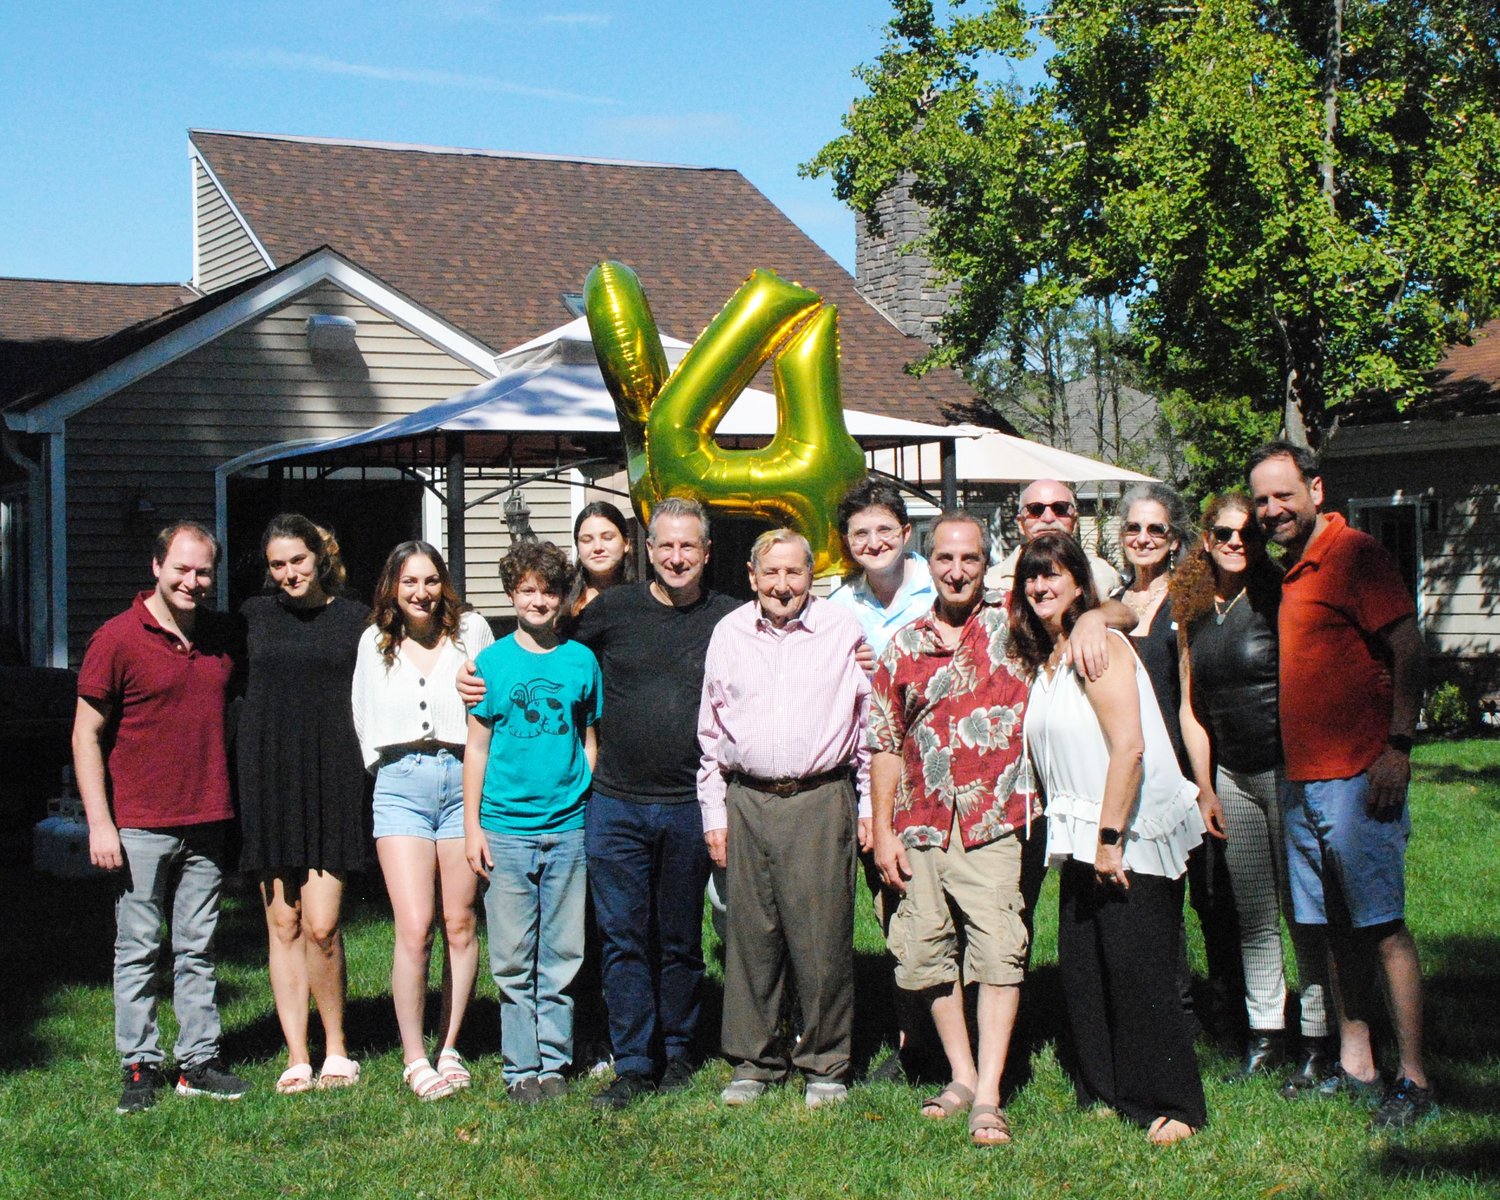 Werner Reich with his family at his 94th birthday party.